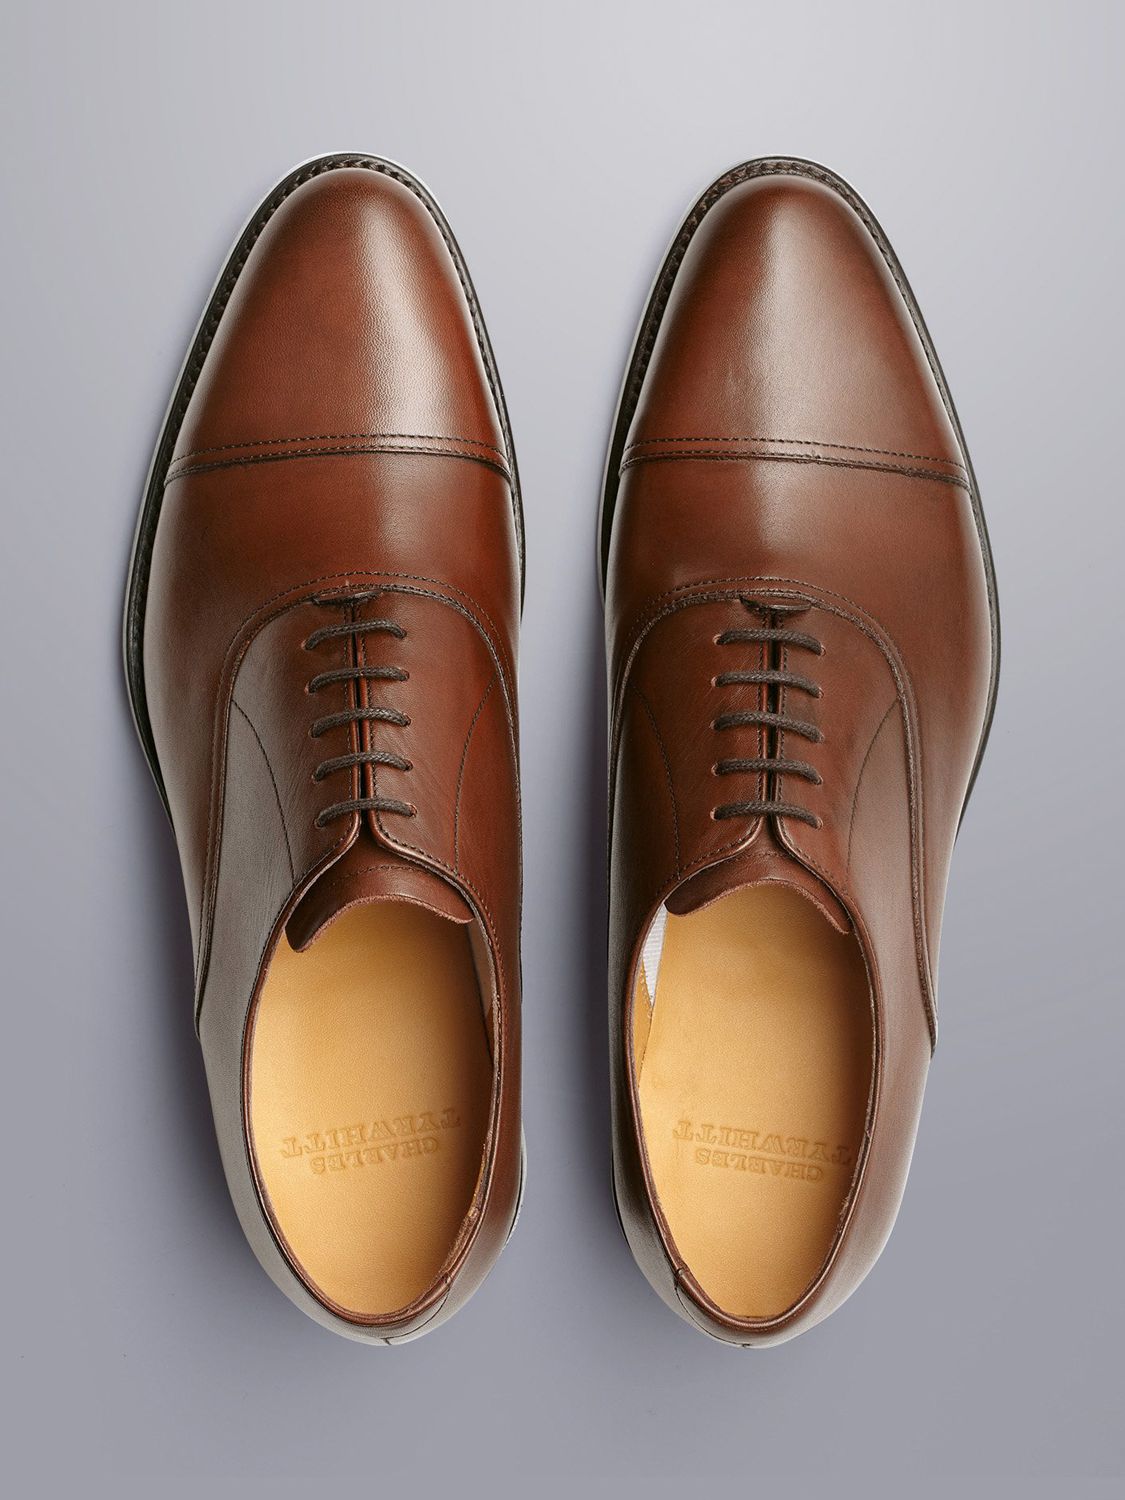 Buy Charles Tyrwhitt Leather Oxford Shoes Online at johnlewis.com